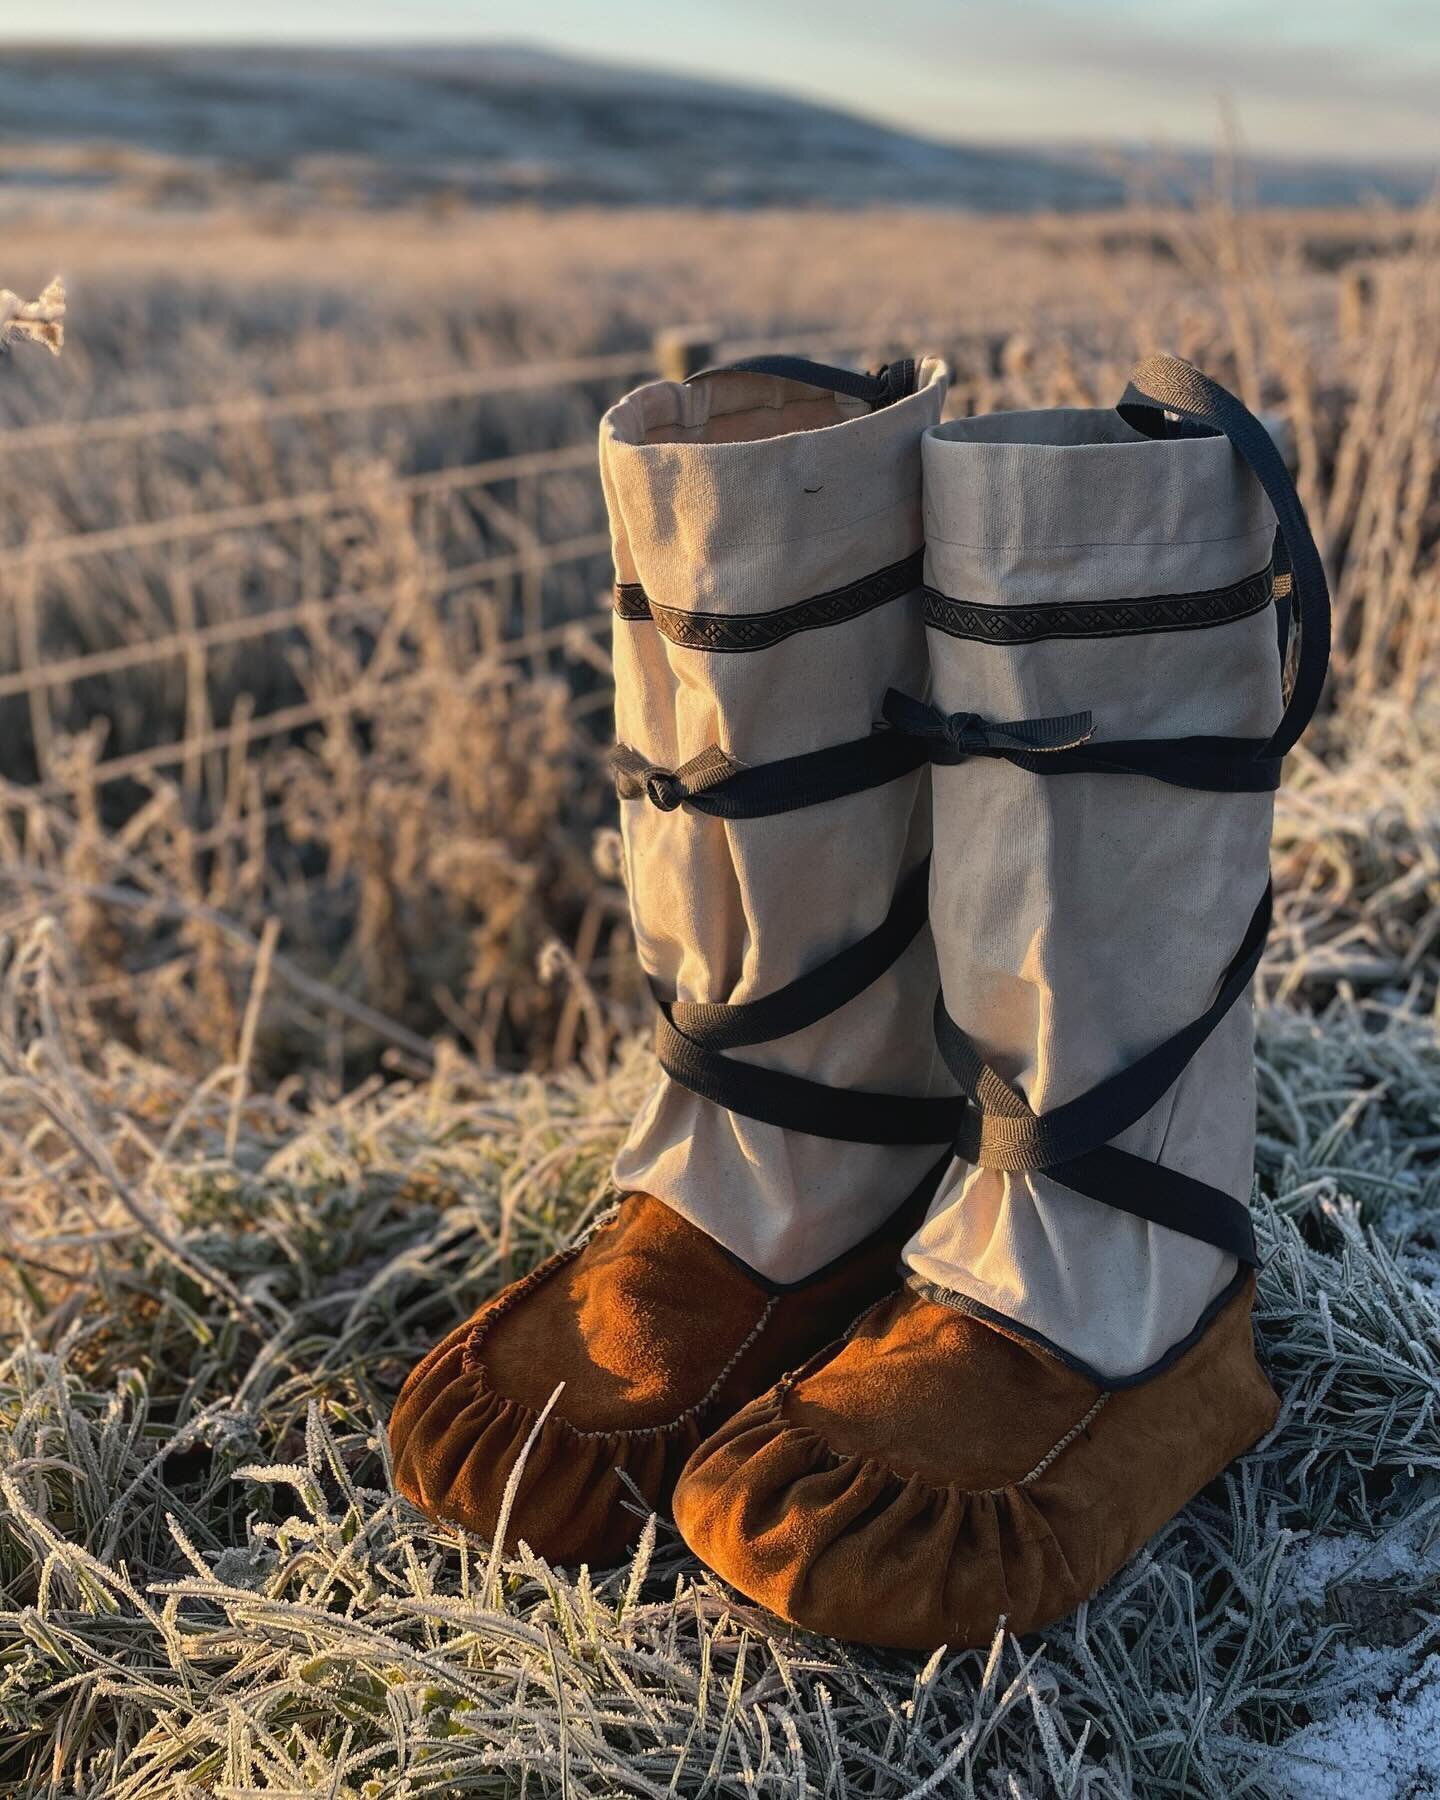 This January we&rsquo;re running a day course for you to learn how to make your very own pair of winter moccasins with a felt wool liner. Run in partnership with @a.woodsman from the Borealis Team, all the details are on howlbushcraft.com As the temp